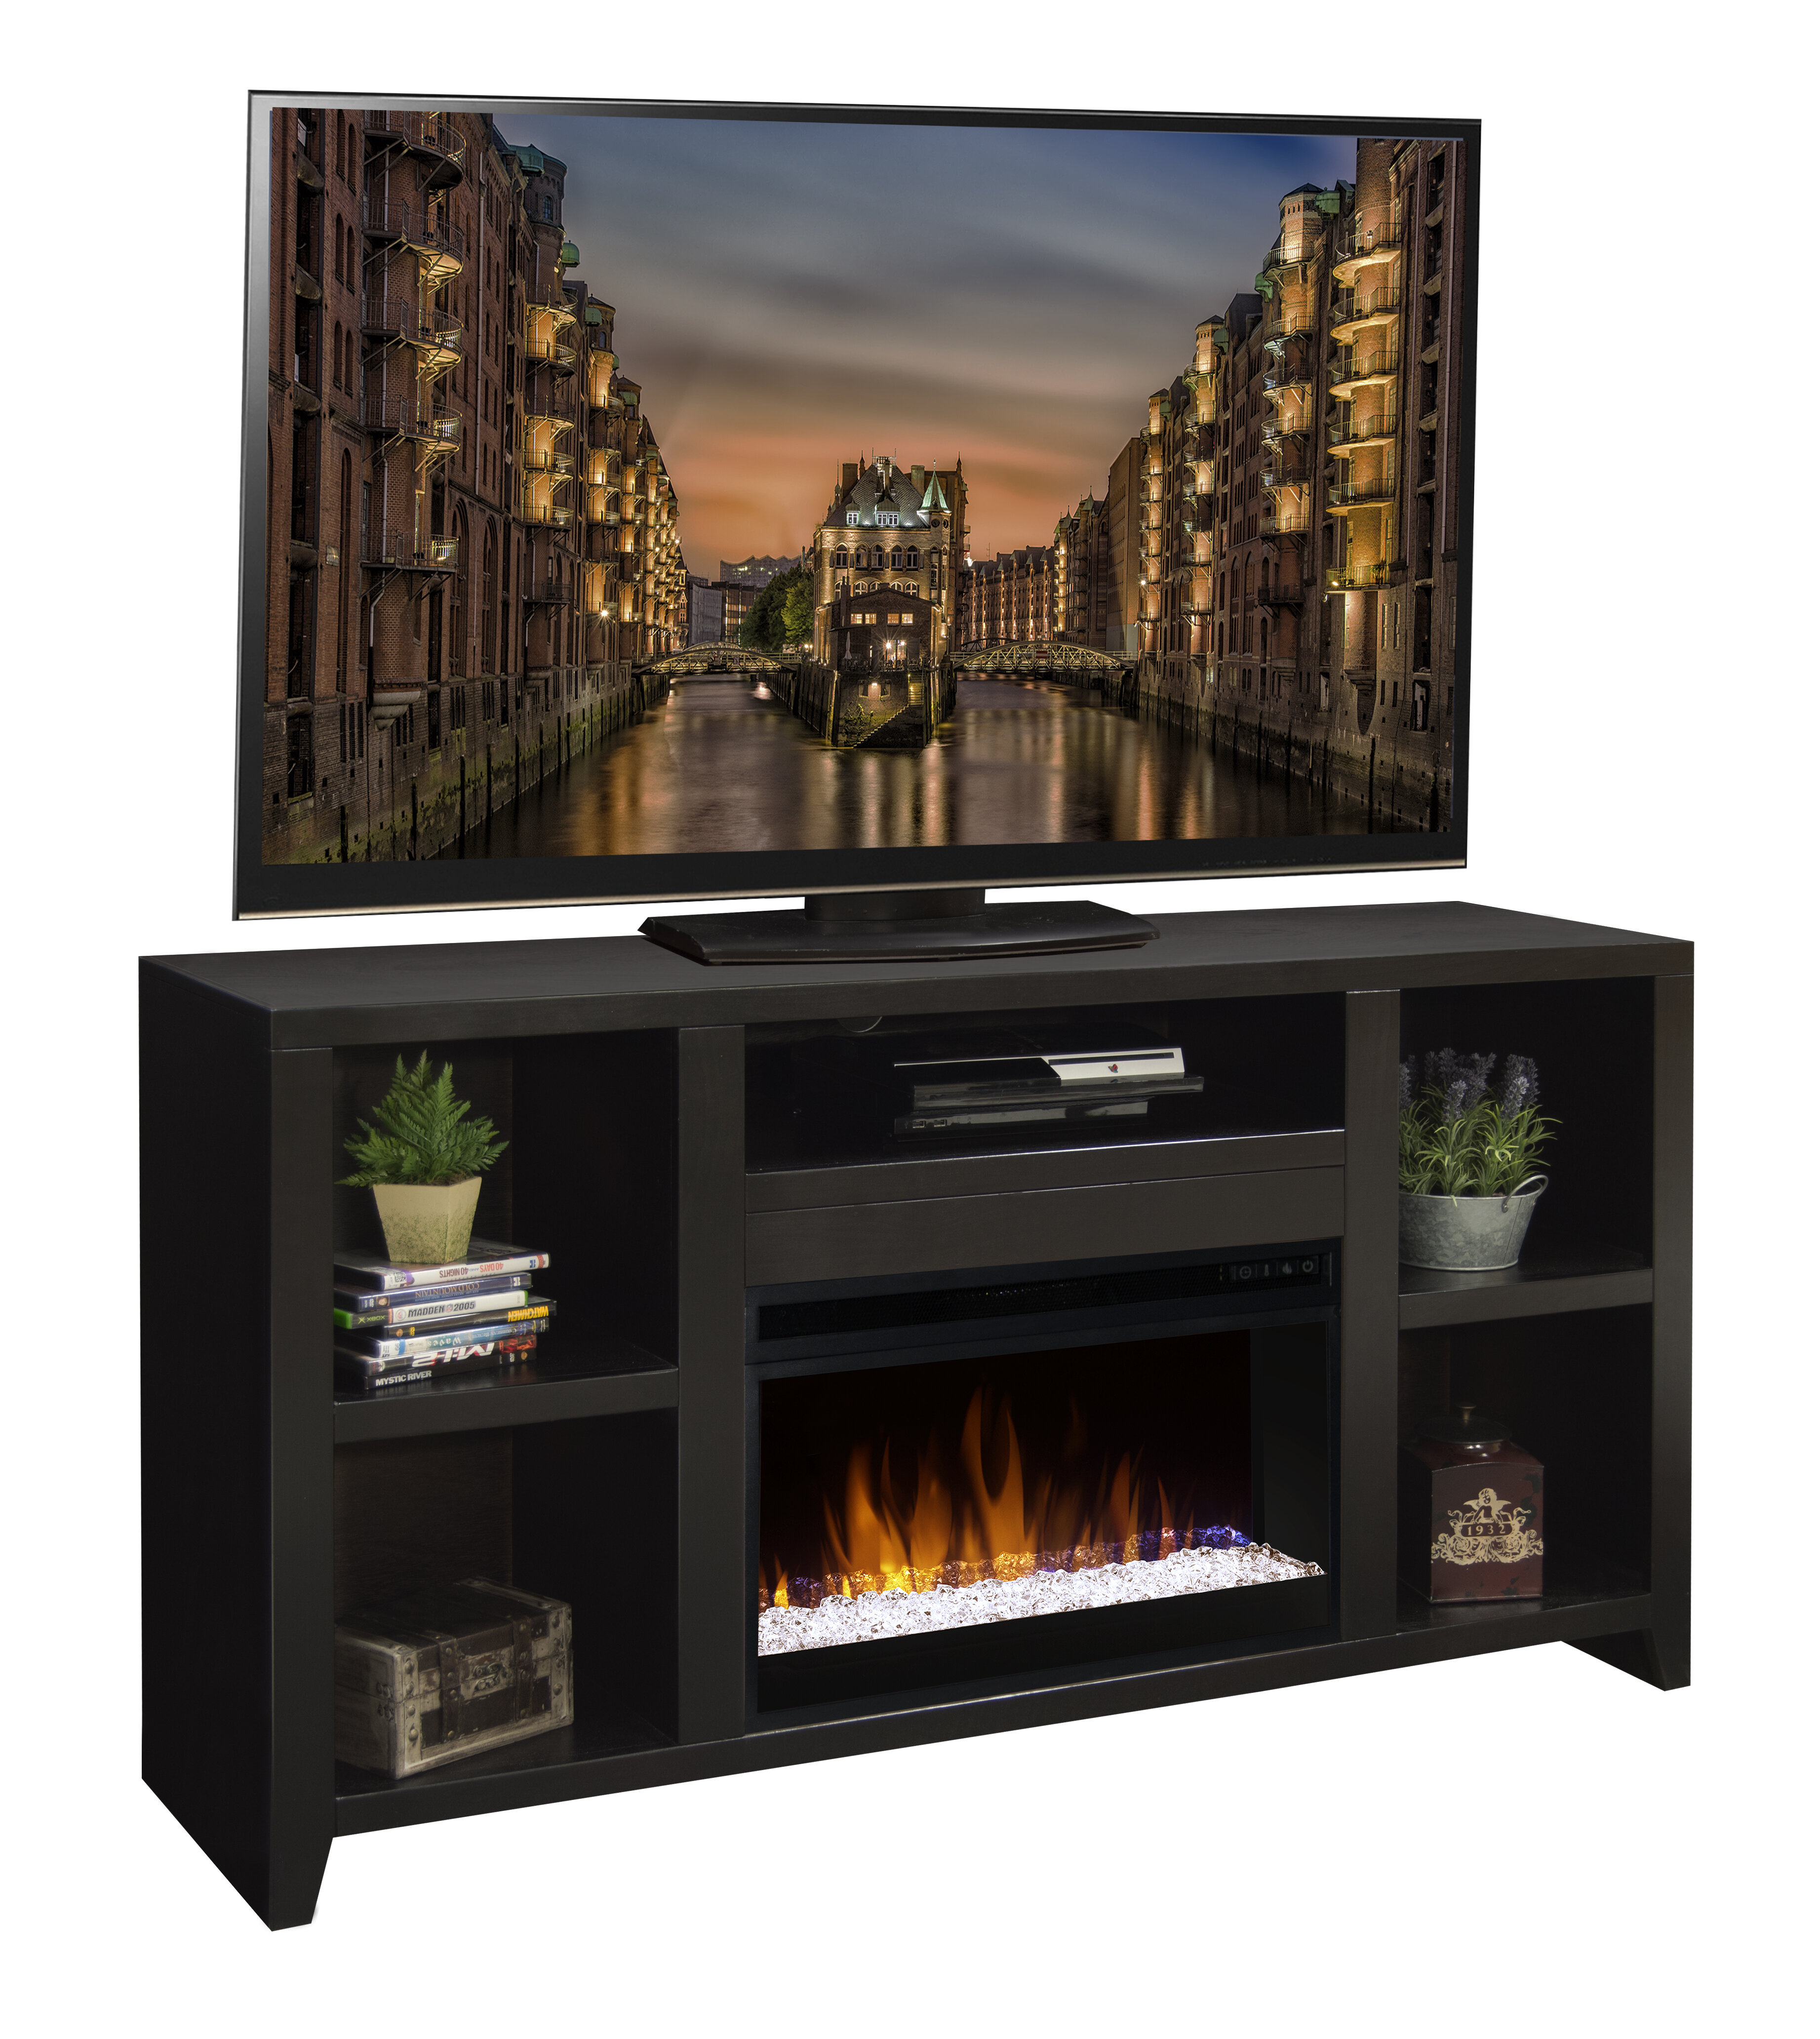 Tv Above Fireplace where to Put Cable Box Luxury Garretson Tv Stand for Tvs Up to 65" with Fireplace